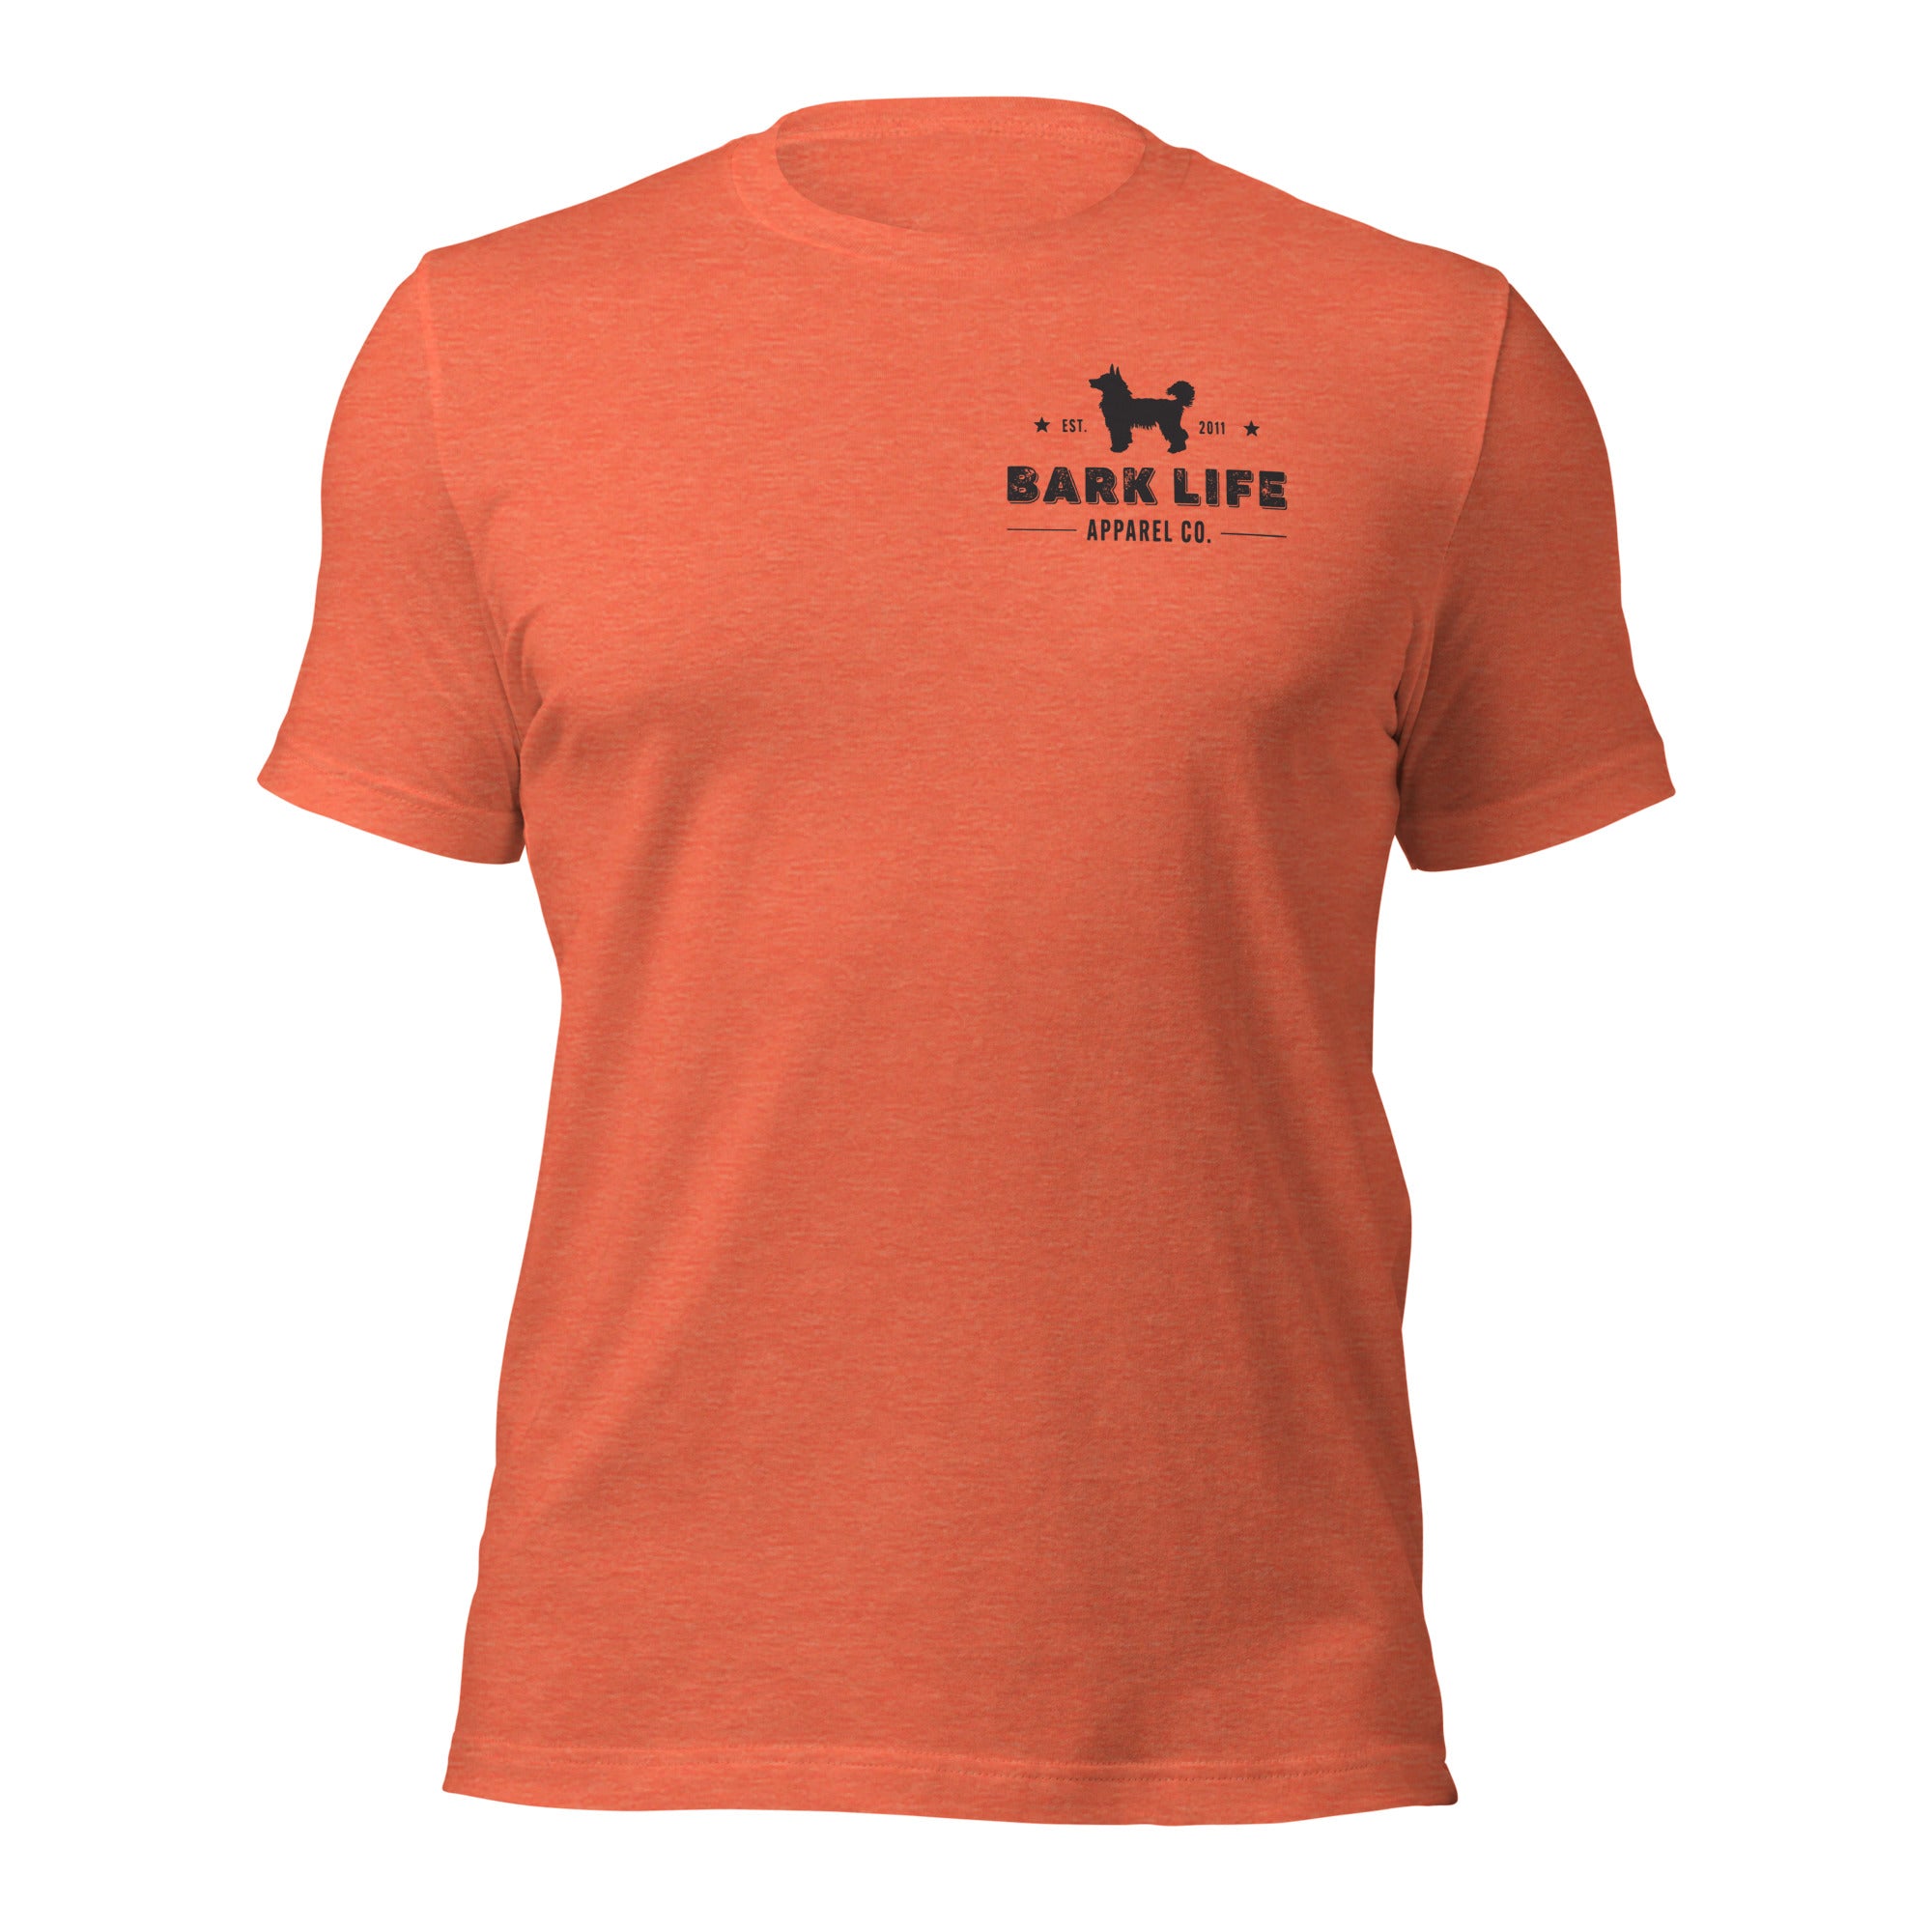 Chinese Crested - Short Sleeve Cotton Tee  Shirt